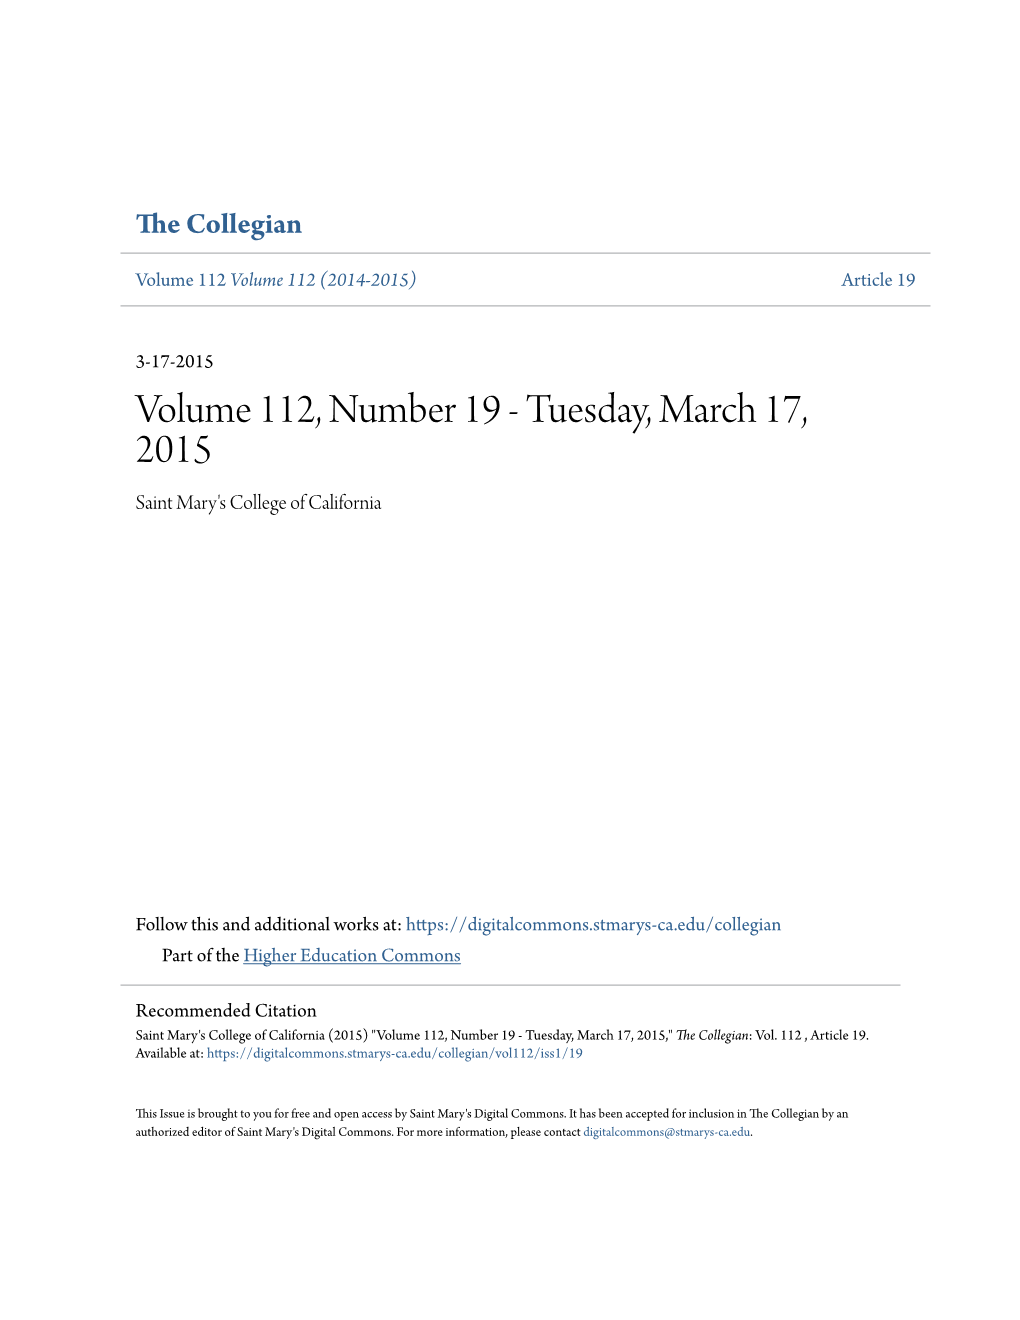 Volume 112, Number 19 - Tuesday, March 17, 2015 Saint Mary's College of California